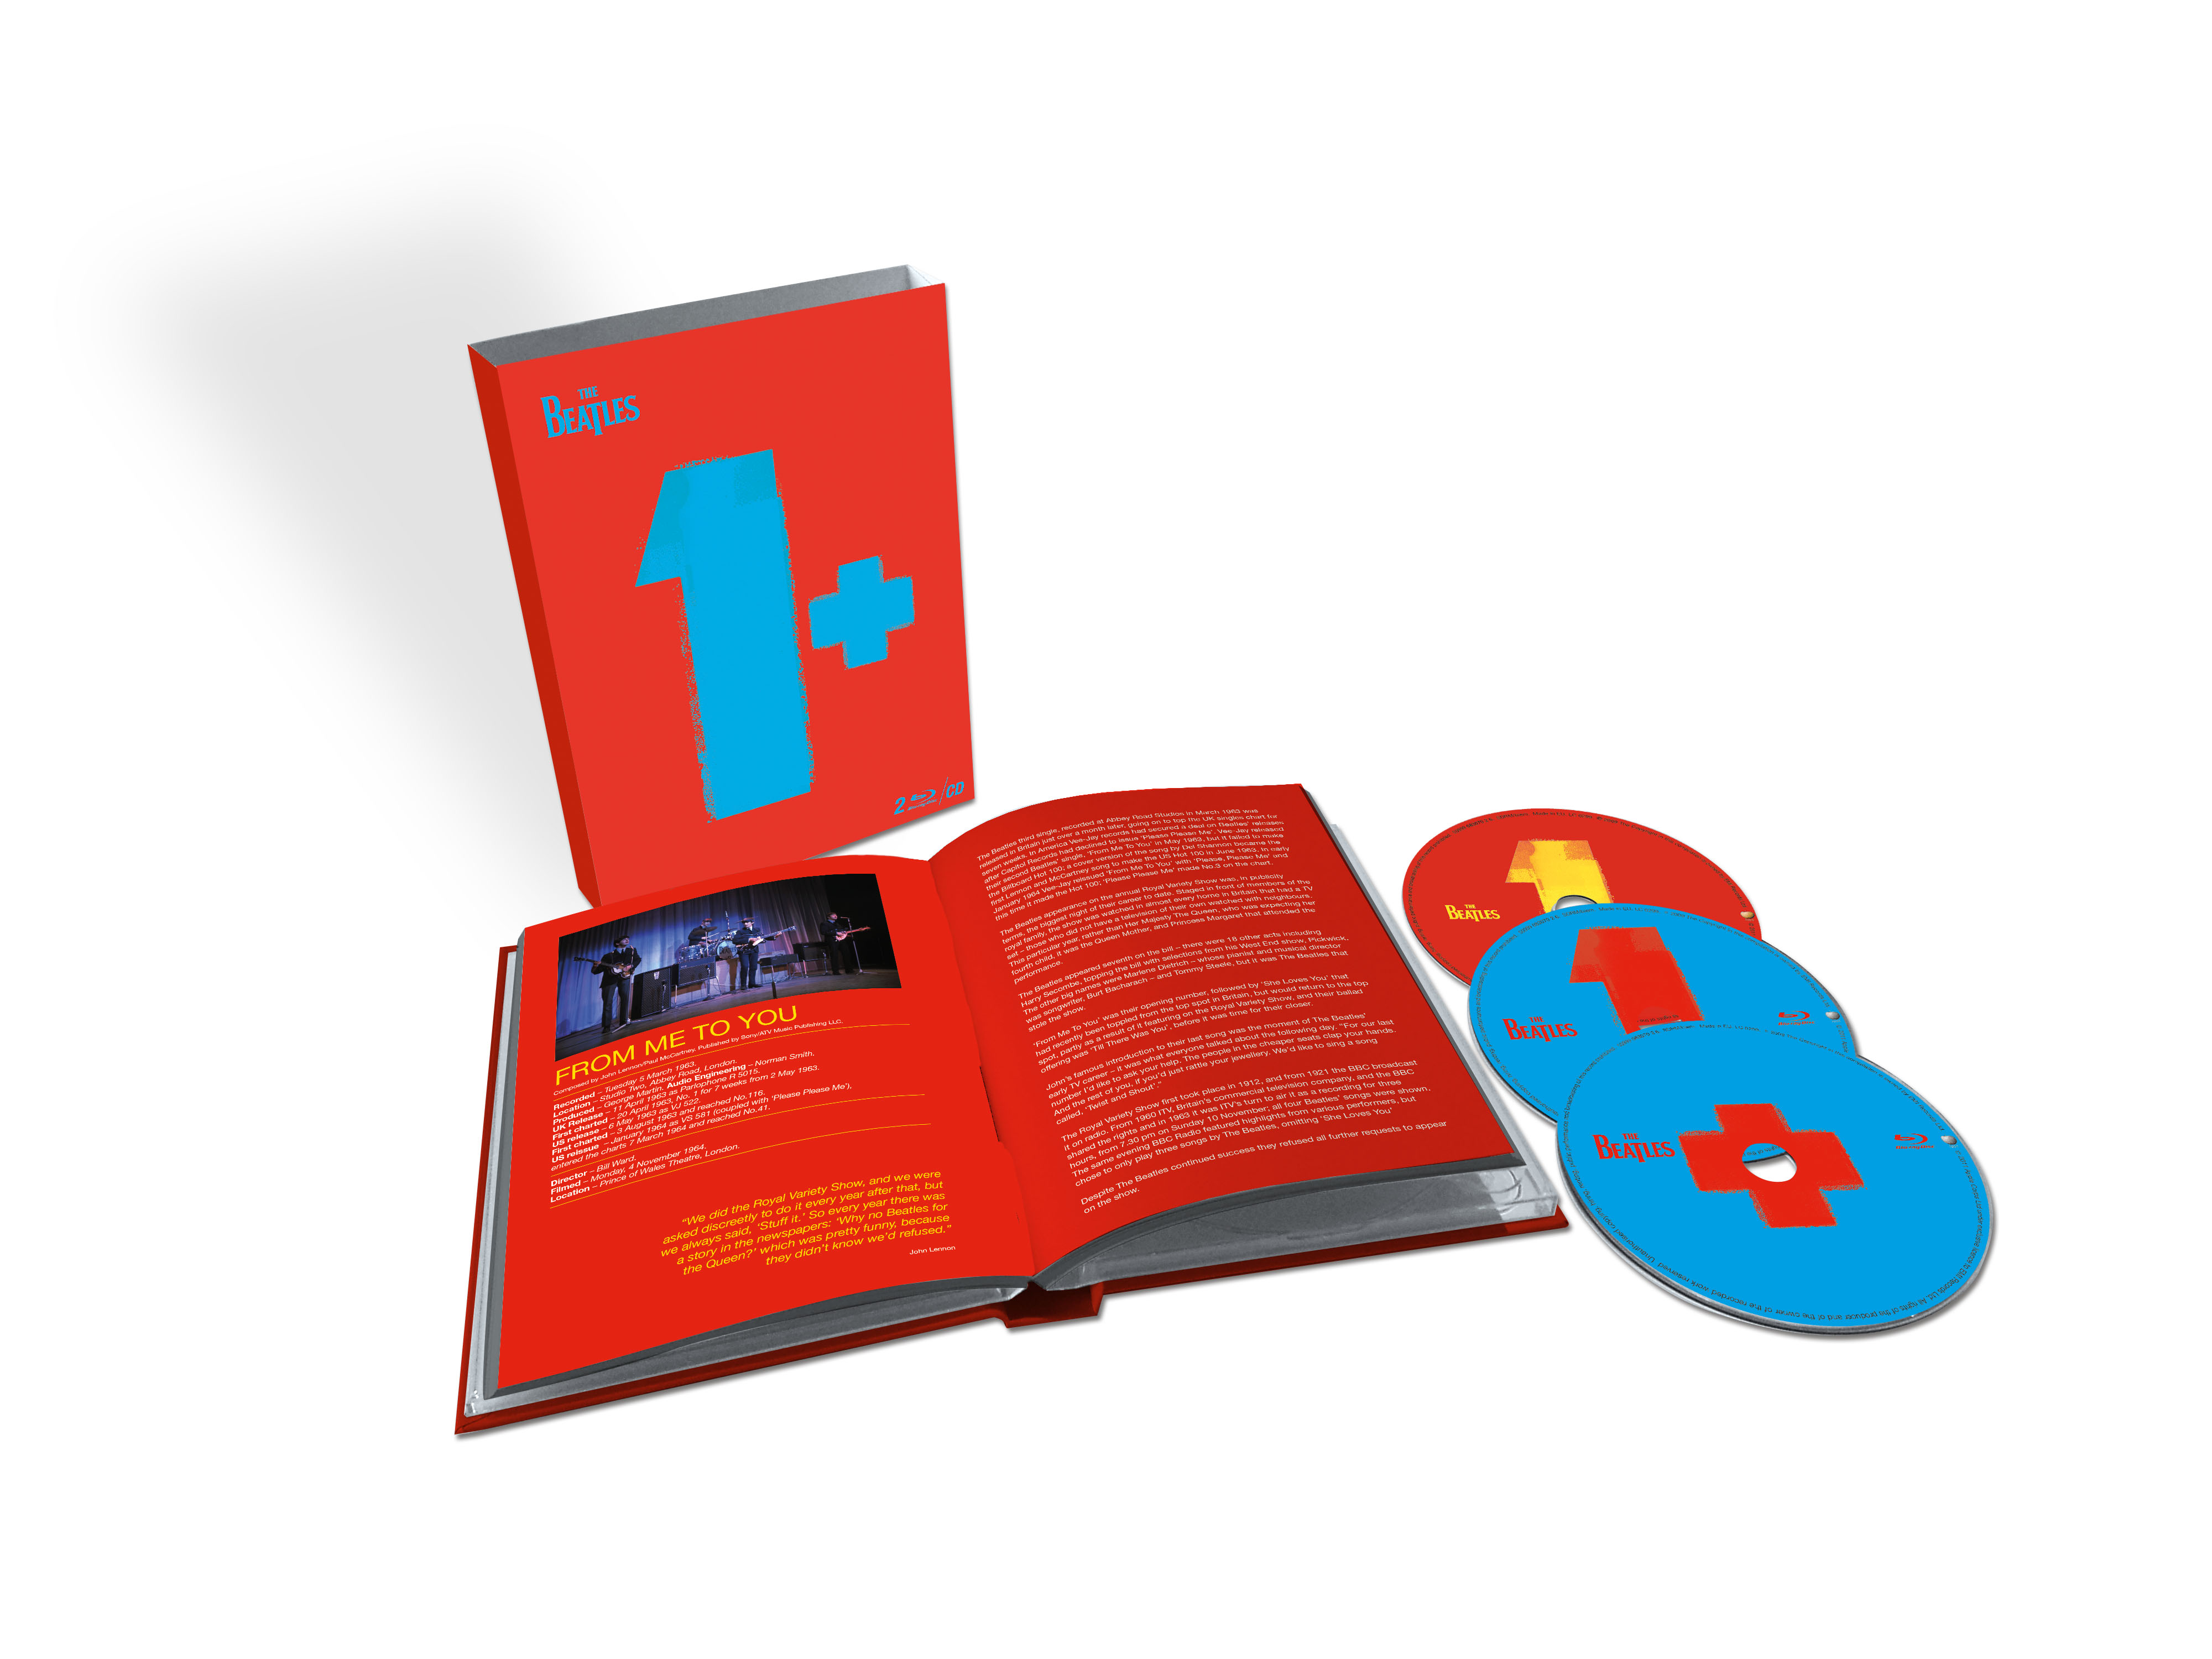 - 1 Edition - Deluxe Disc) (Ltd. + Beatles CD Blu-ray (CD The + 2 Blu-ray)